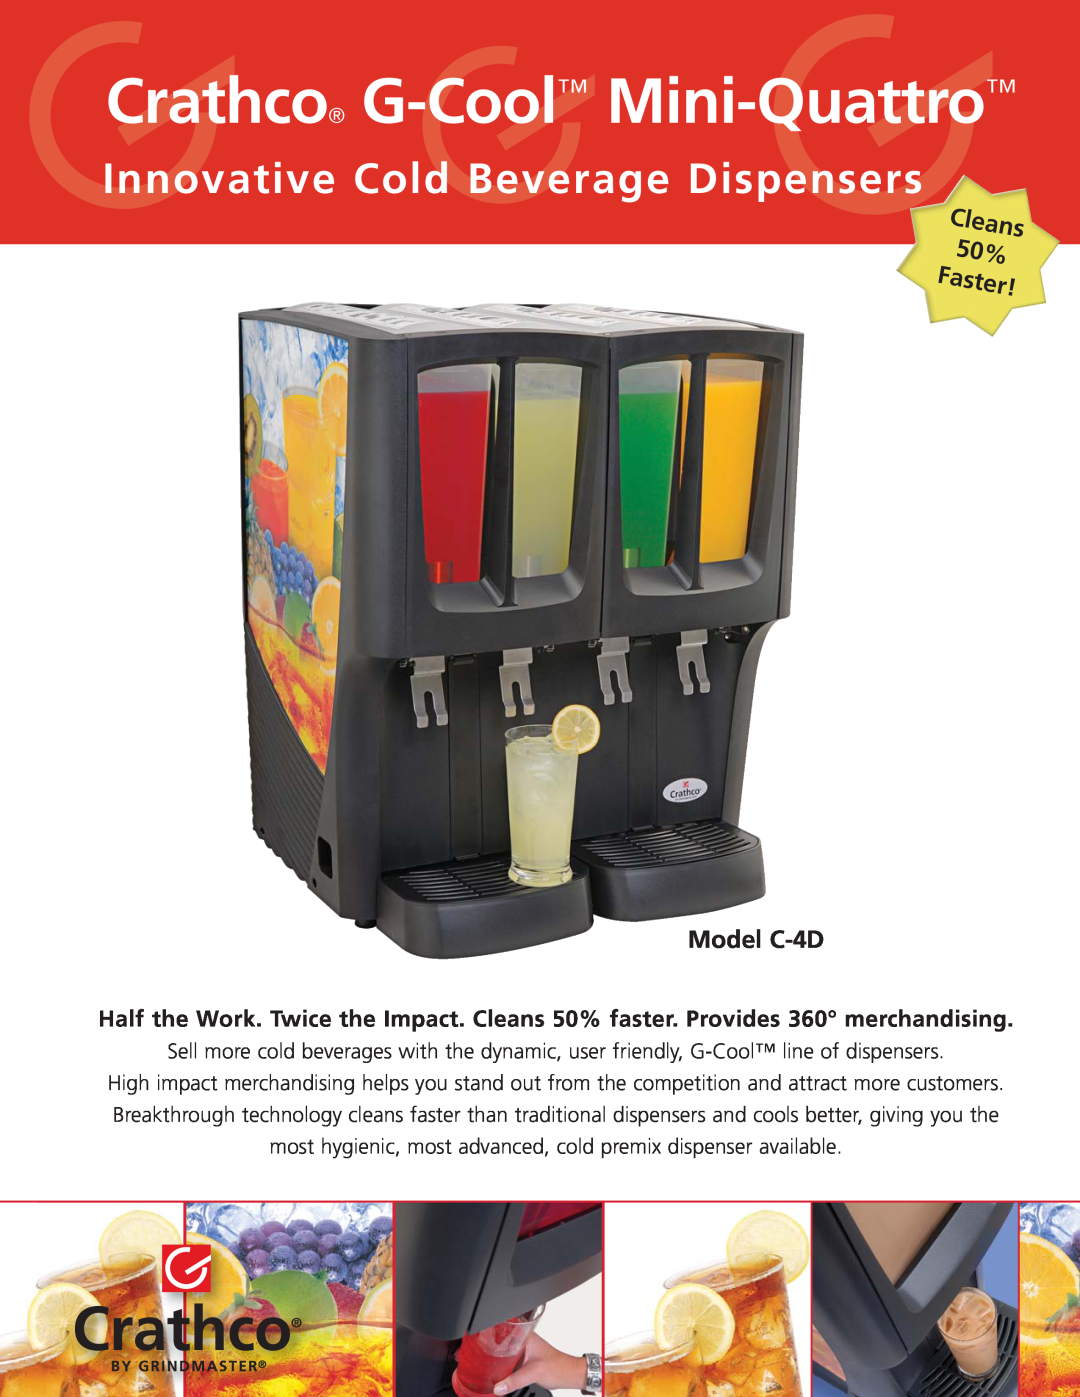 Grindmaster manual Crathco G-Cool Mini-Quattro, Innovative Cold Beverage Dispensers, Cleans 50% Faster, Model C-4D 